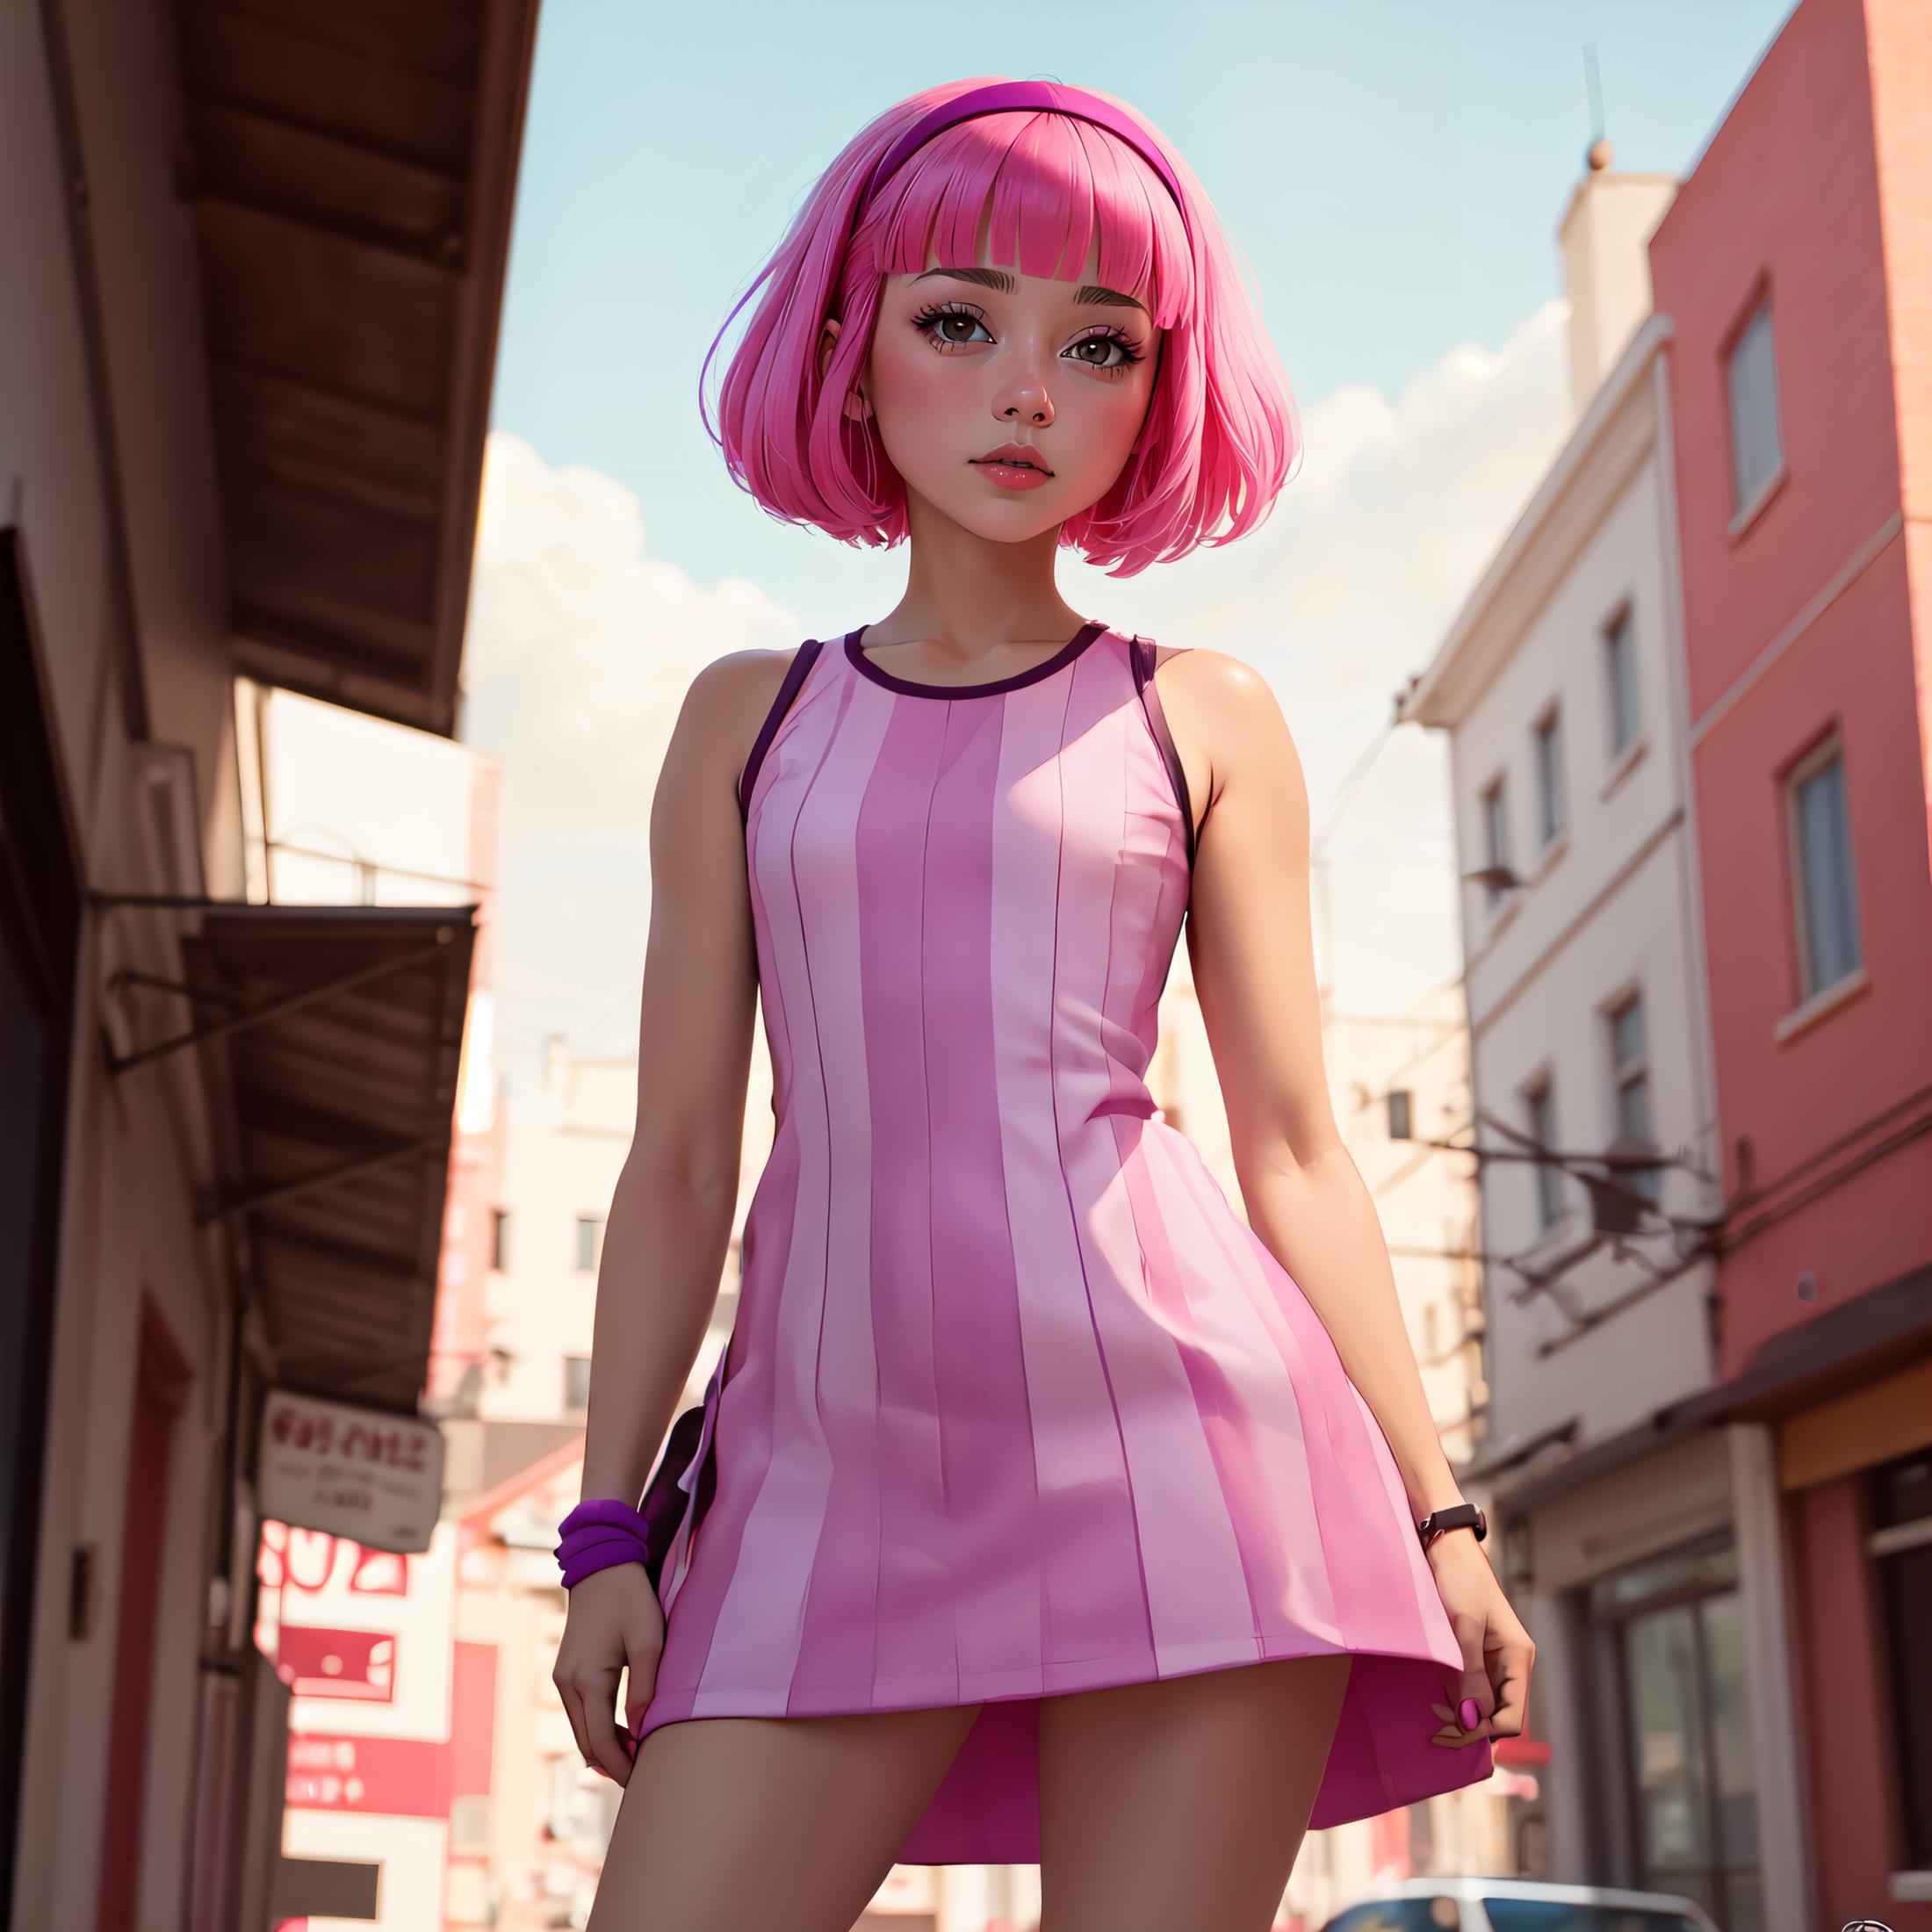 Stephanie - Lazy Town image by userviewer77